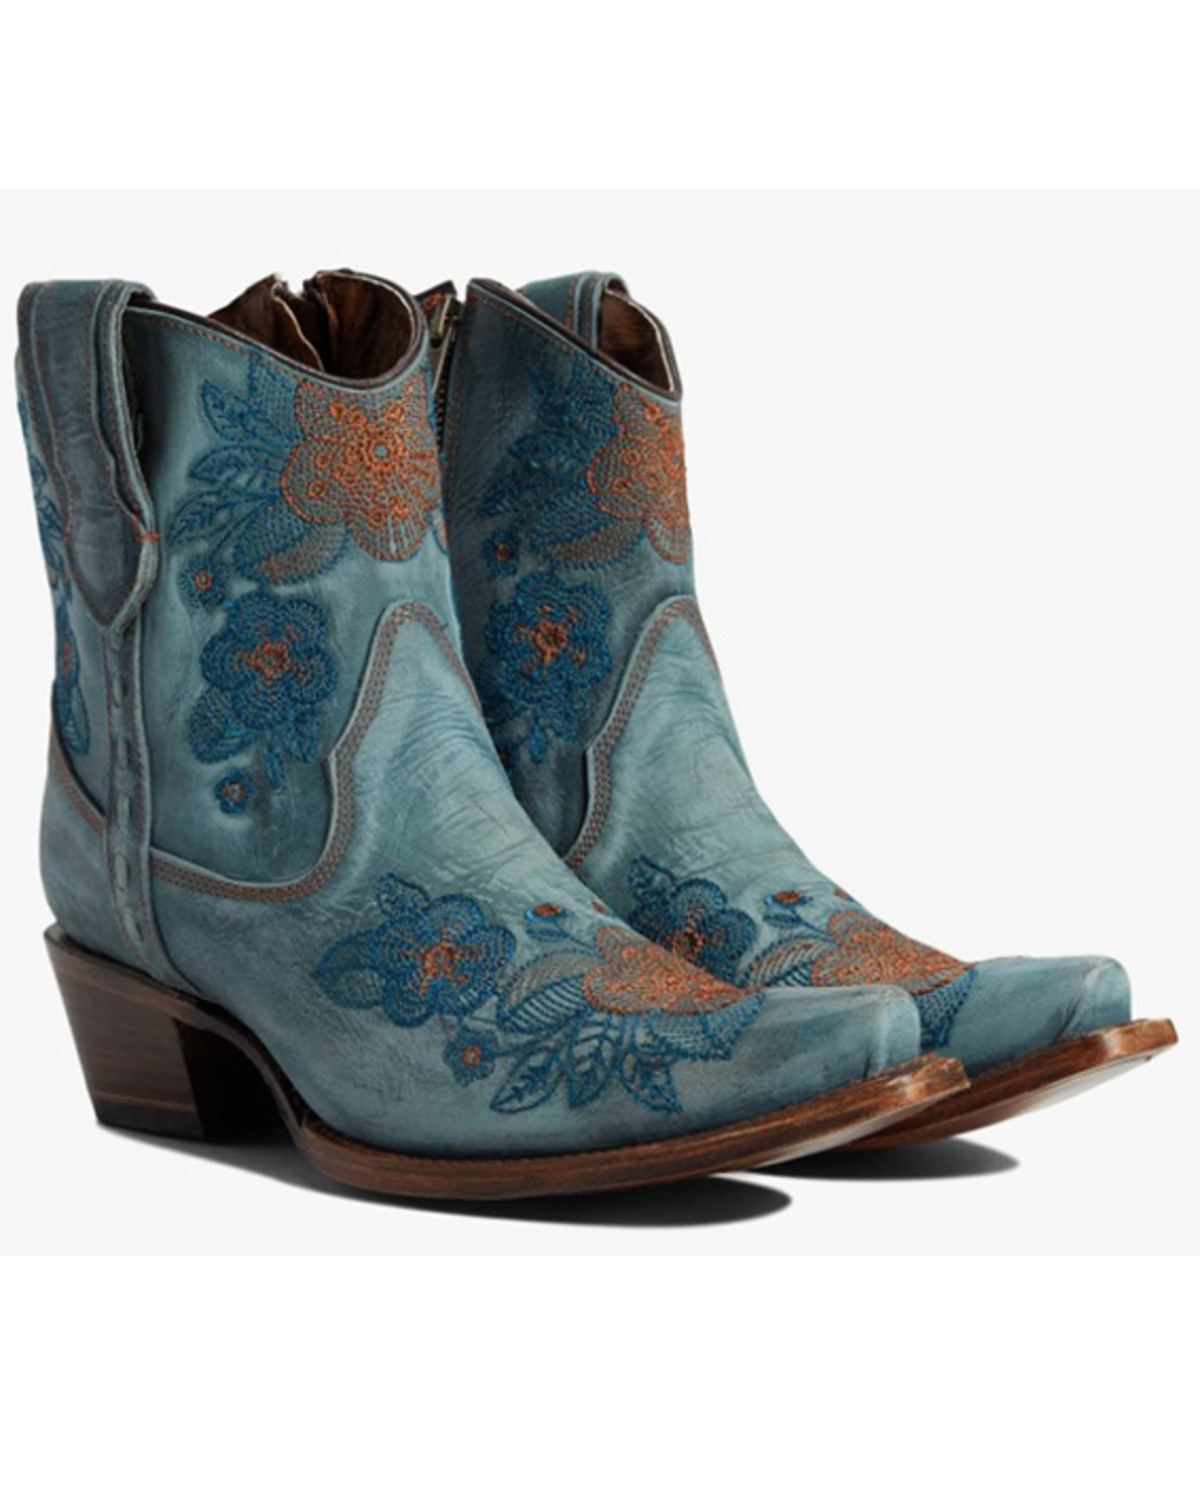 Corral Women's Flower Embroidered Ankle Western Booties - Snip Toe